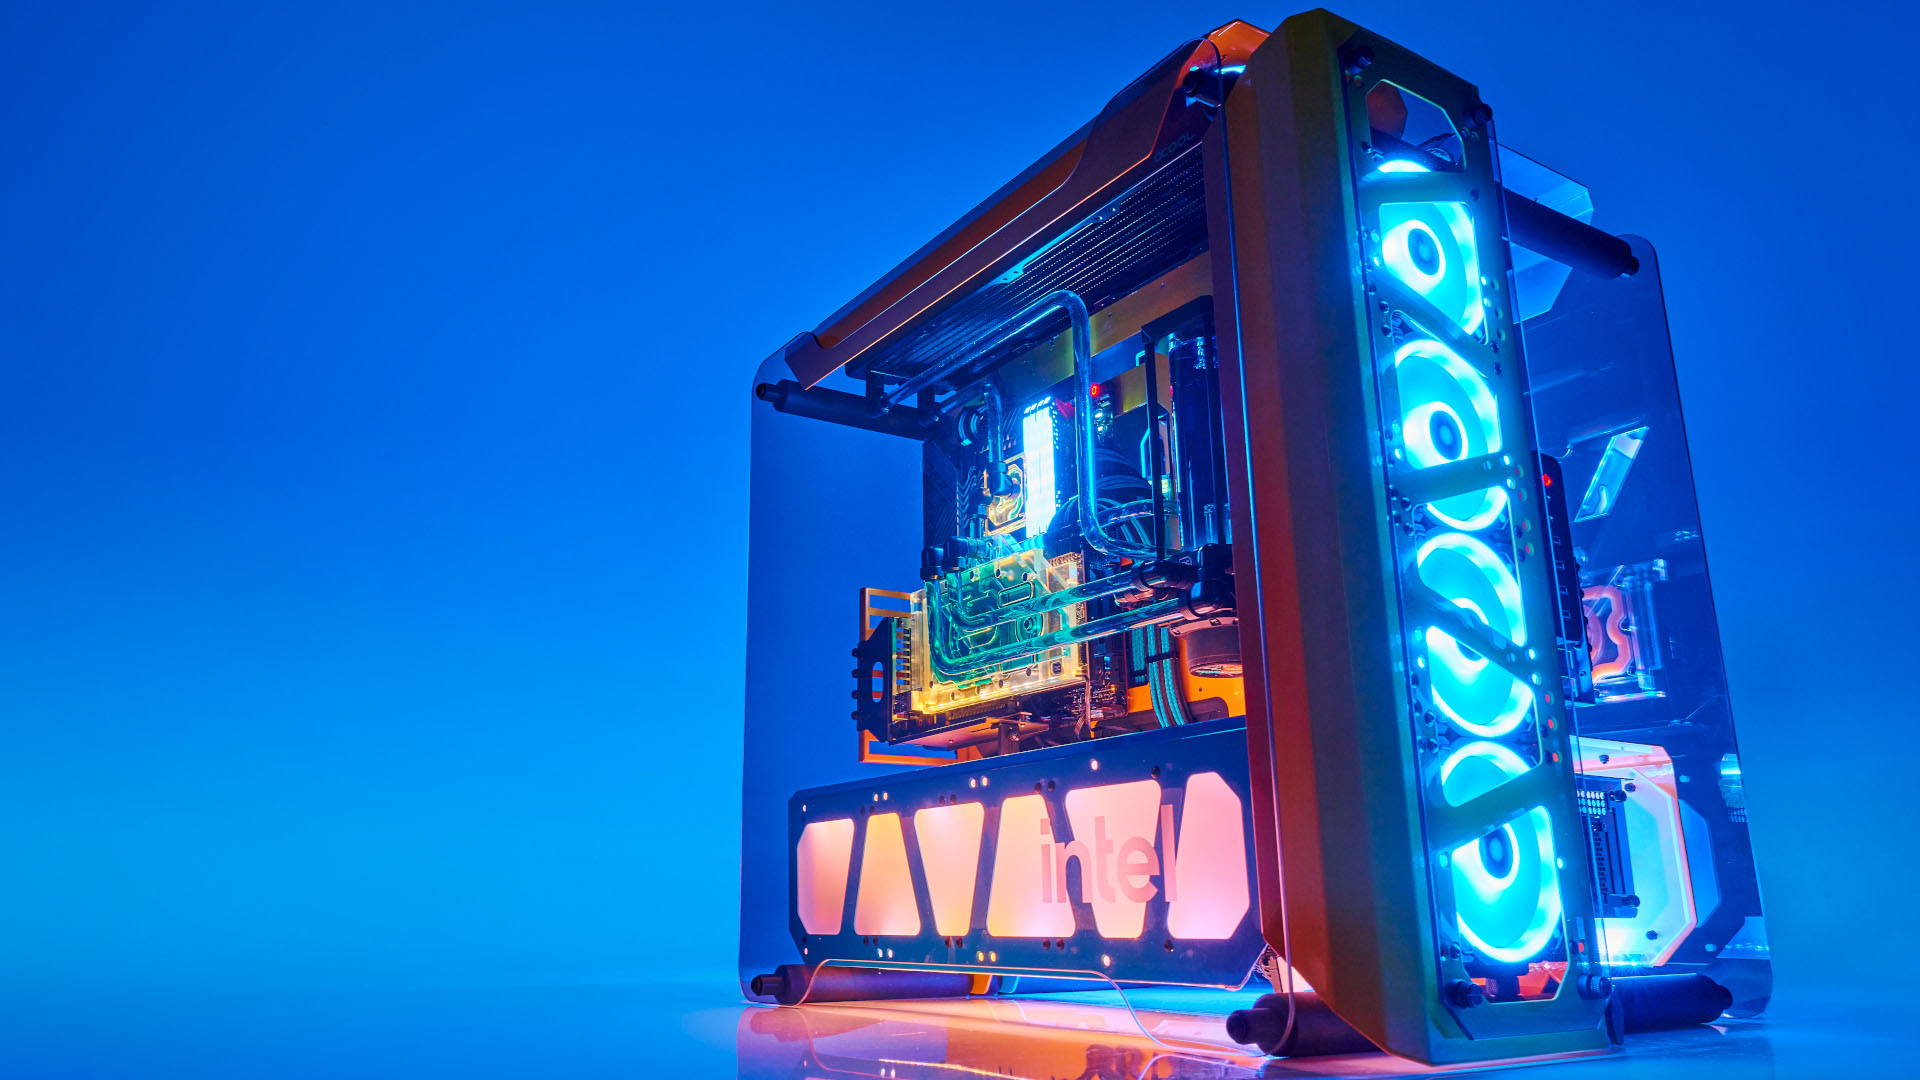 This blue and yellow Intel-themed build features two top gaming PCs